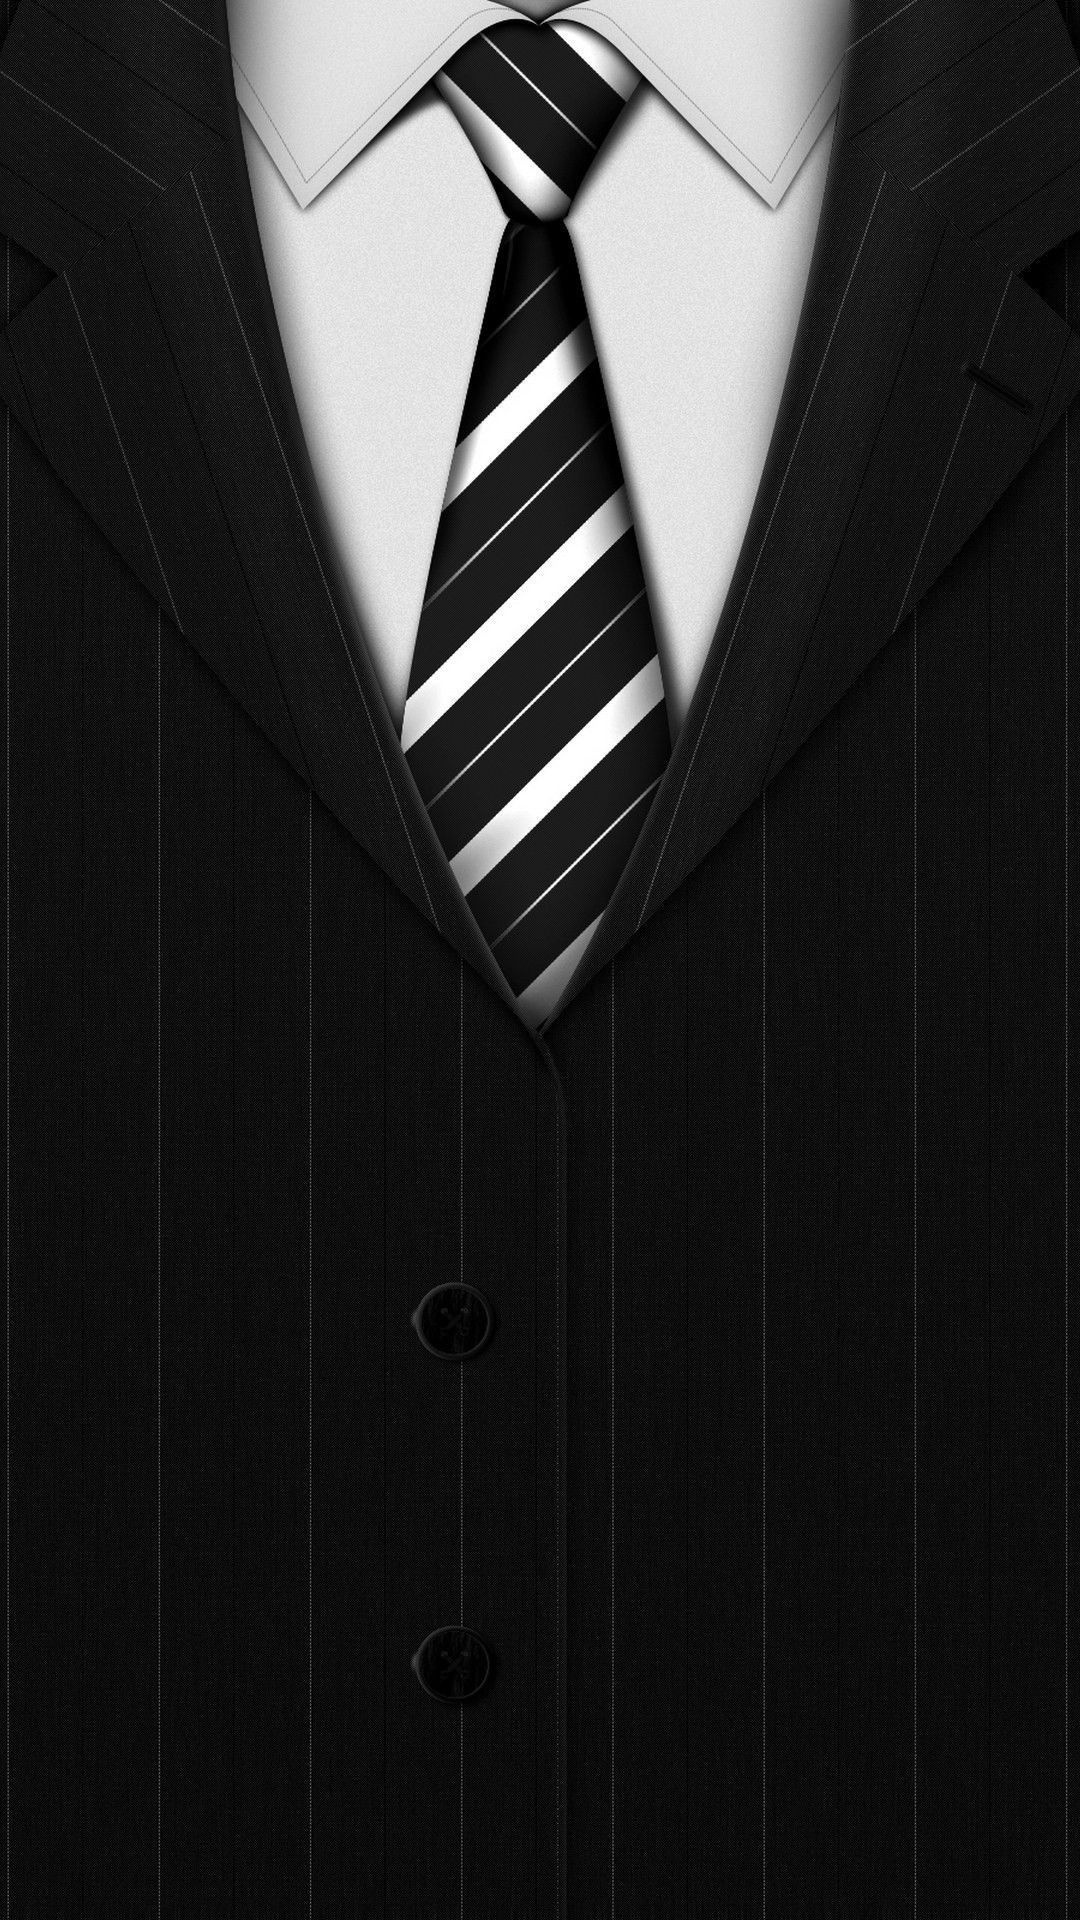 Tie, Abstract black suit, iPhone 6 wallpaper, Cool wallpapers for phones, 1080x1920 Full HD Handy